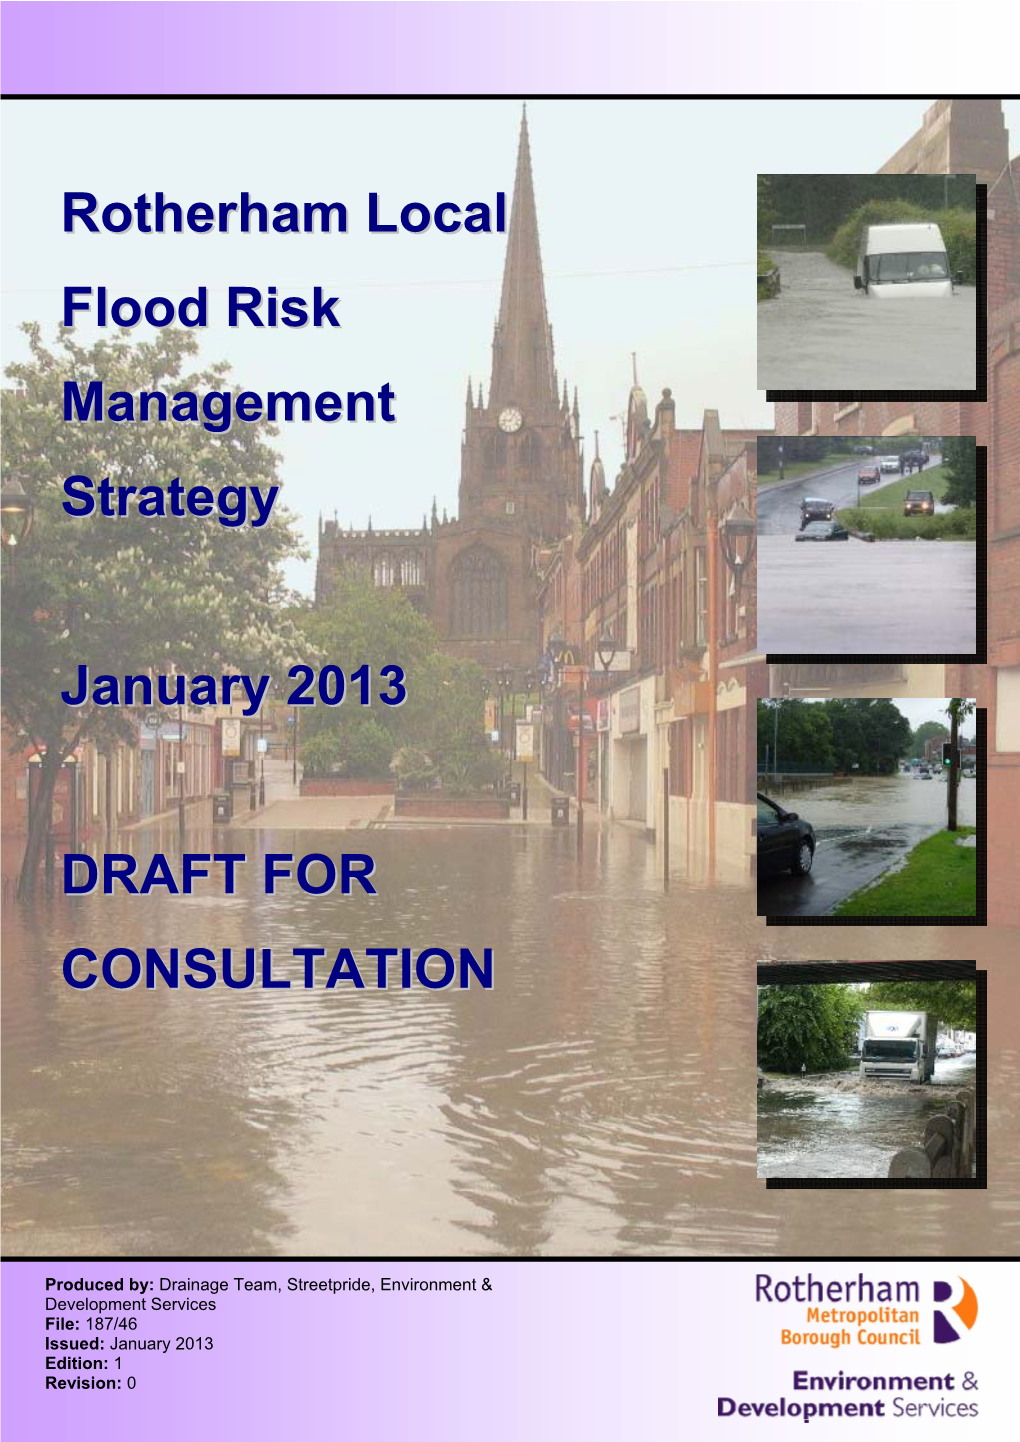 Rotherham Local Flood Risk Management Strategy January